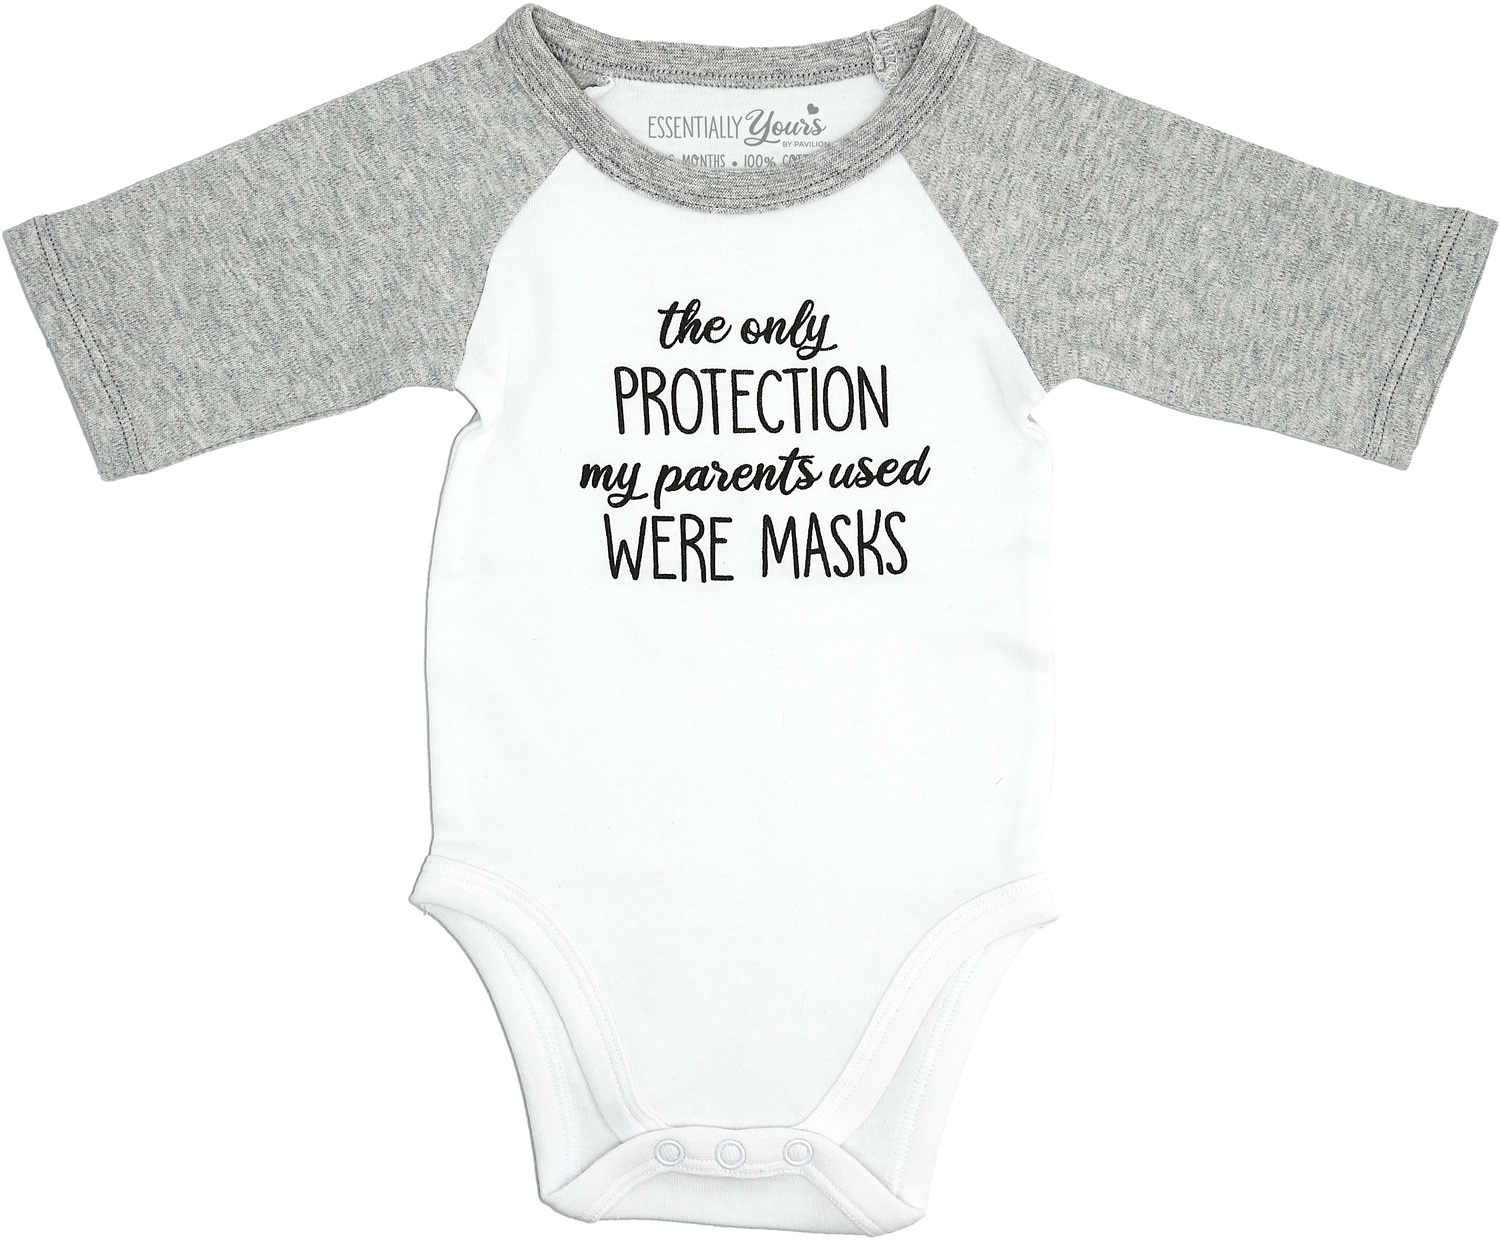 Protection by Essentially Yours - Protection - 0-6 Months Bodysuit
3/4 Length Heathered Gray Sleeve